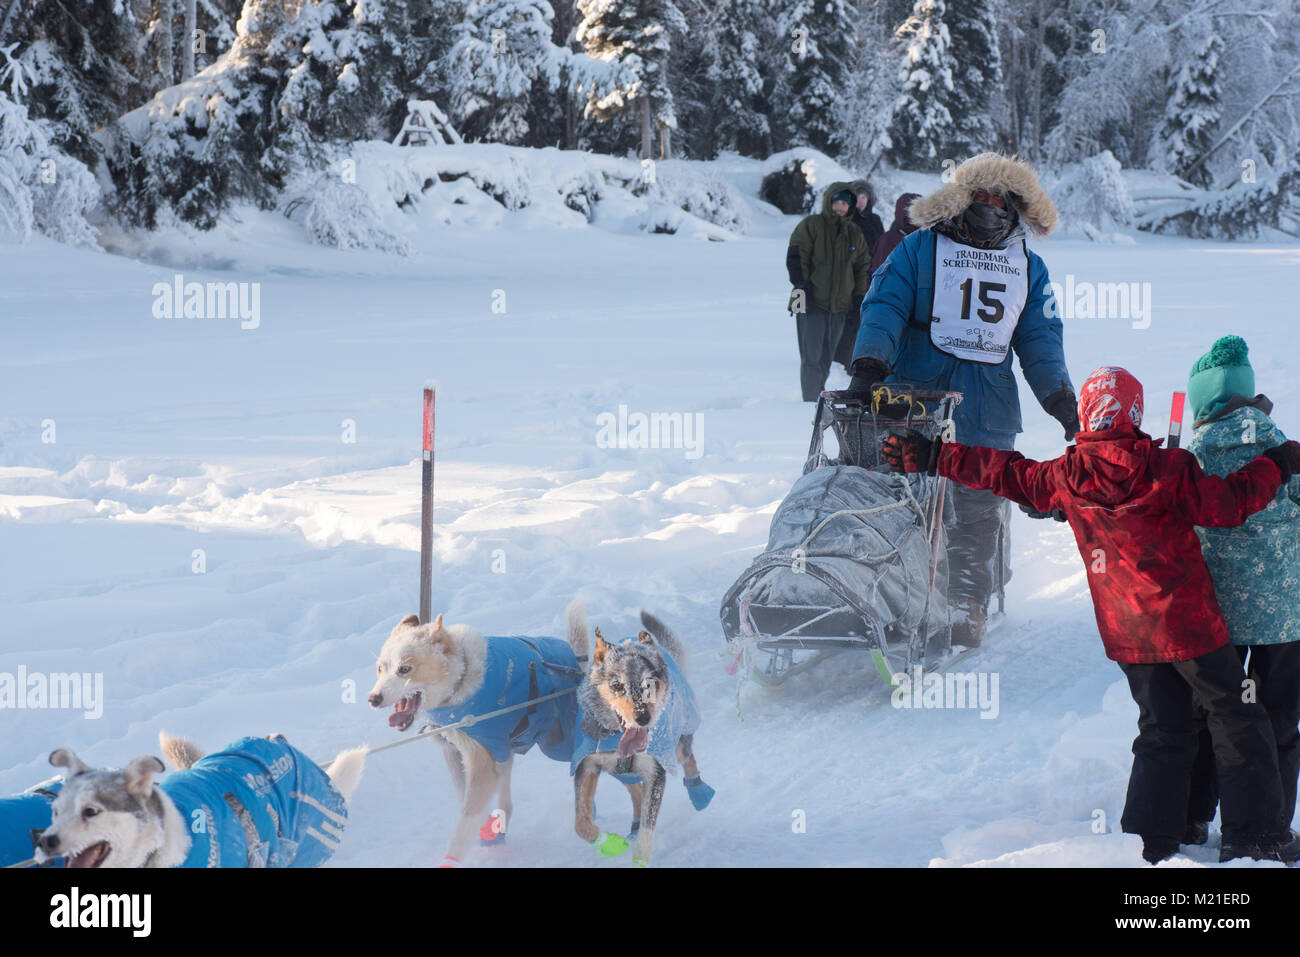 FAIRBANKS, ALASKA - FEBRUARY 3, 2018: Rookie racer Riley Dyche from Fairbanks, AK, leans to give high fives to young fans during the 2018 Yukon Quest. Credit: Roger Asbury/Alamy Live News Stock Photo